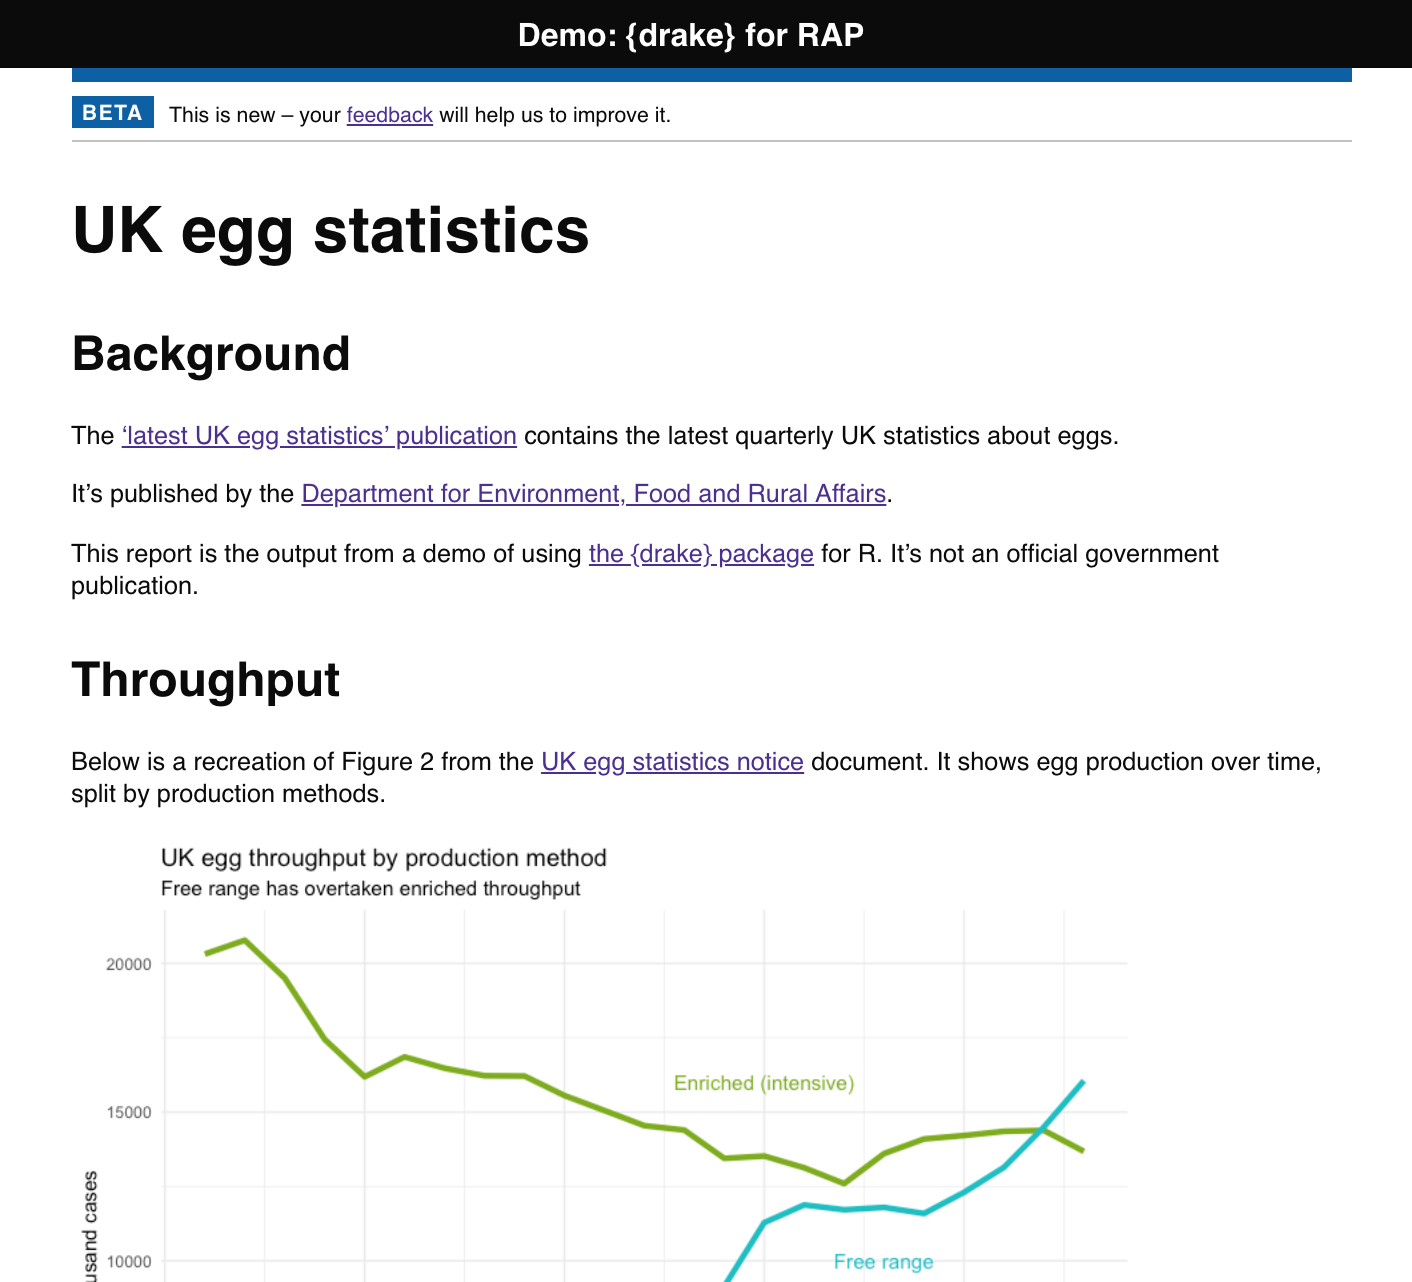 A screenshot of the top section of the demo report, with the title 'UK egg statistics' and sections for 'background' and 'throughput'. The top of a chart tracking egg production is visible.